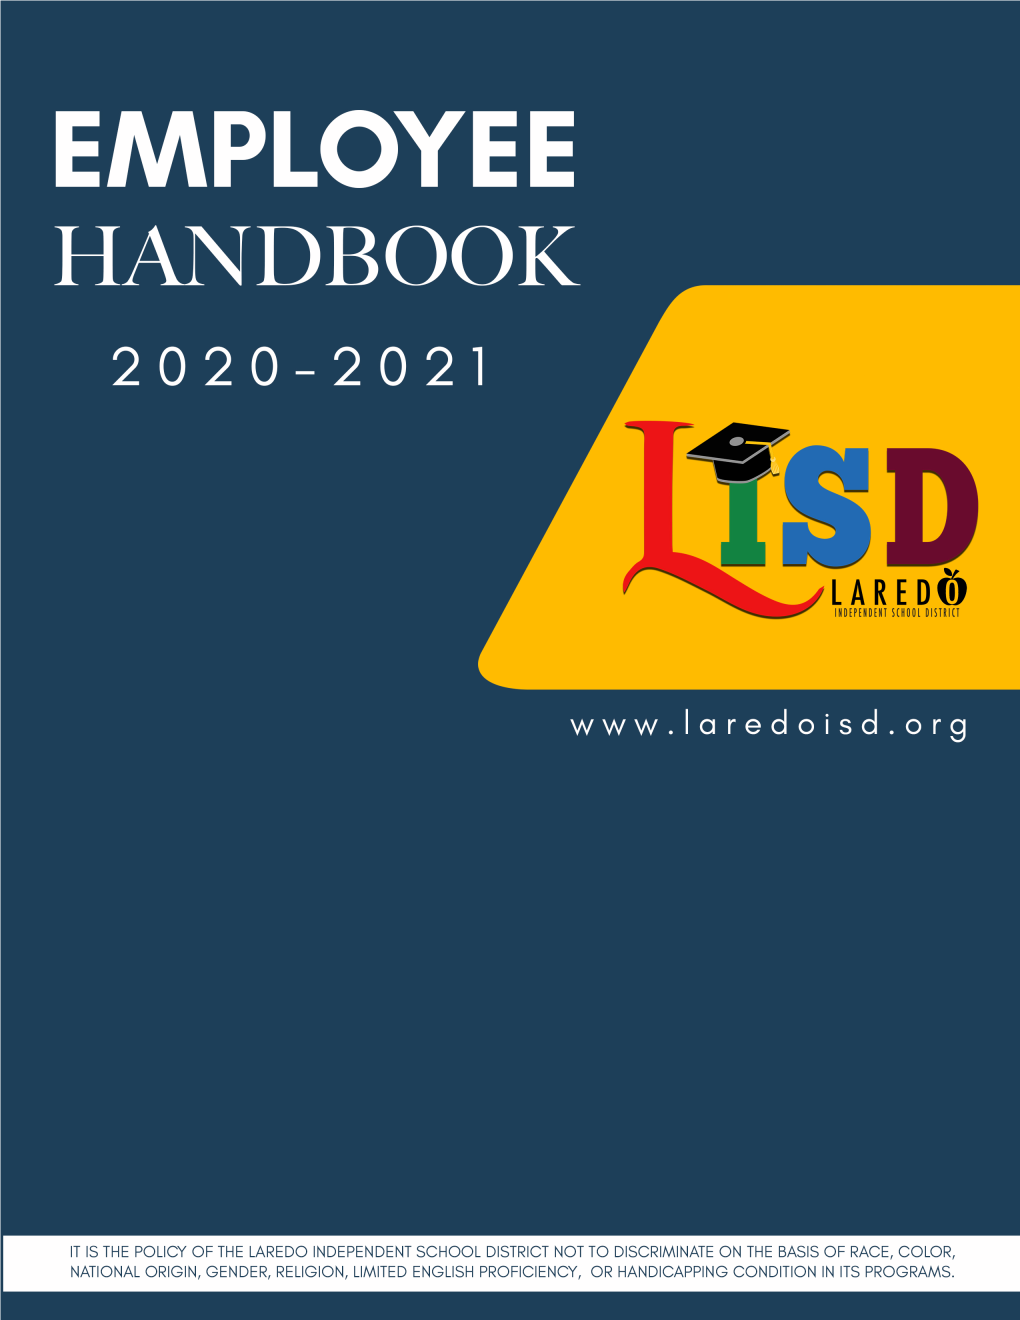 Laredo ISD 2020-2021 Employee Handbook If You Have Difficulty Accessing the Information in This Document Because of a Disability, Please E-Mail Egarza@Laredoisd.Org